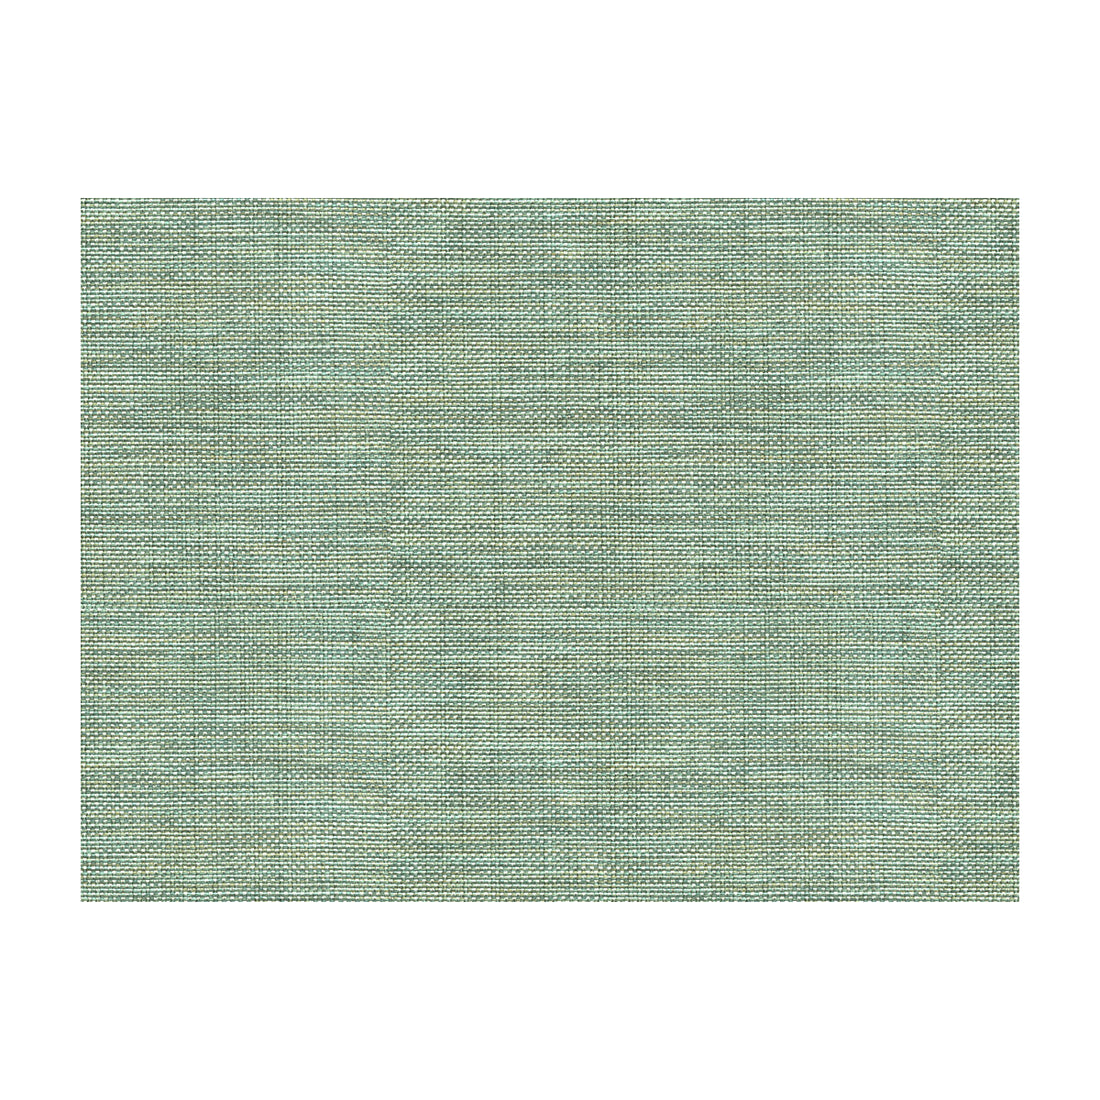 Kravet Basics fabric in 30299-1511 color - pattern 30299.1511.0 - by Kravet Basics in the Perfect Plains collection